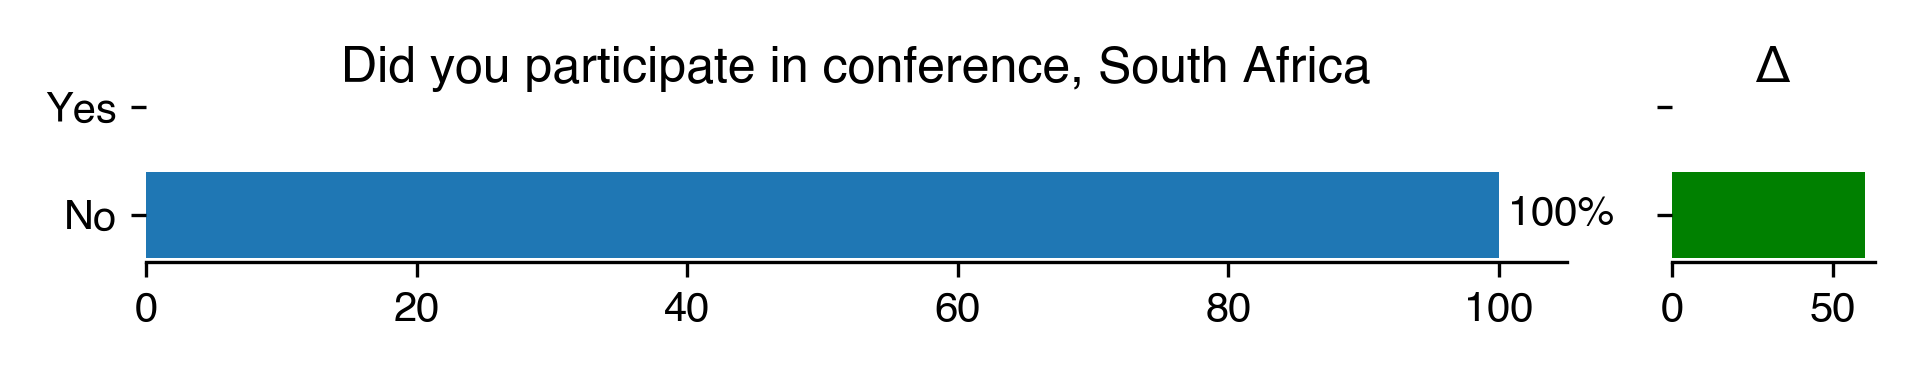 did-you-participate-in-conference